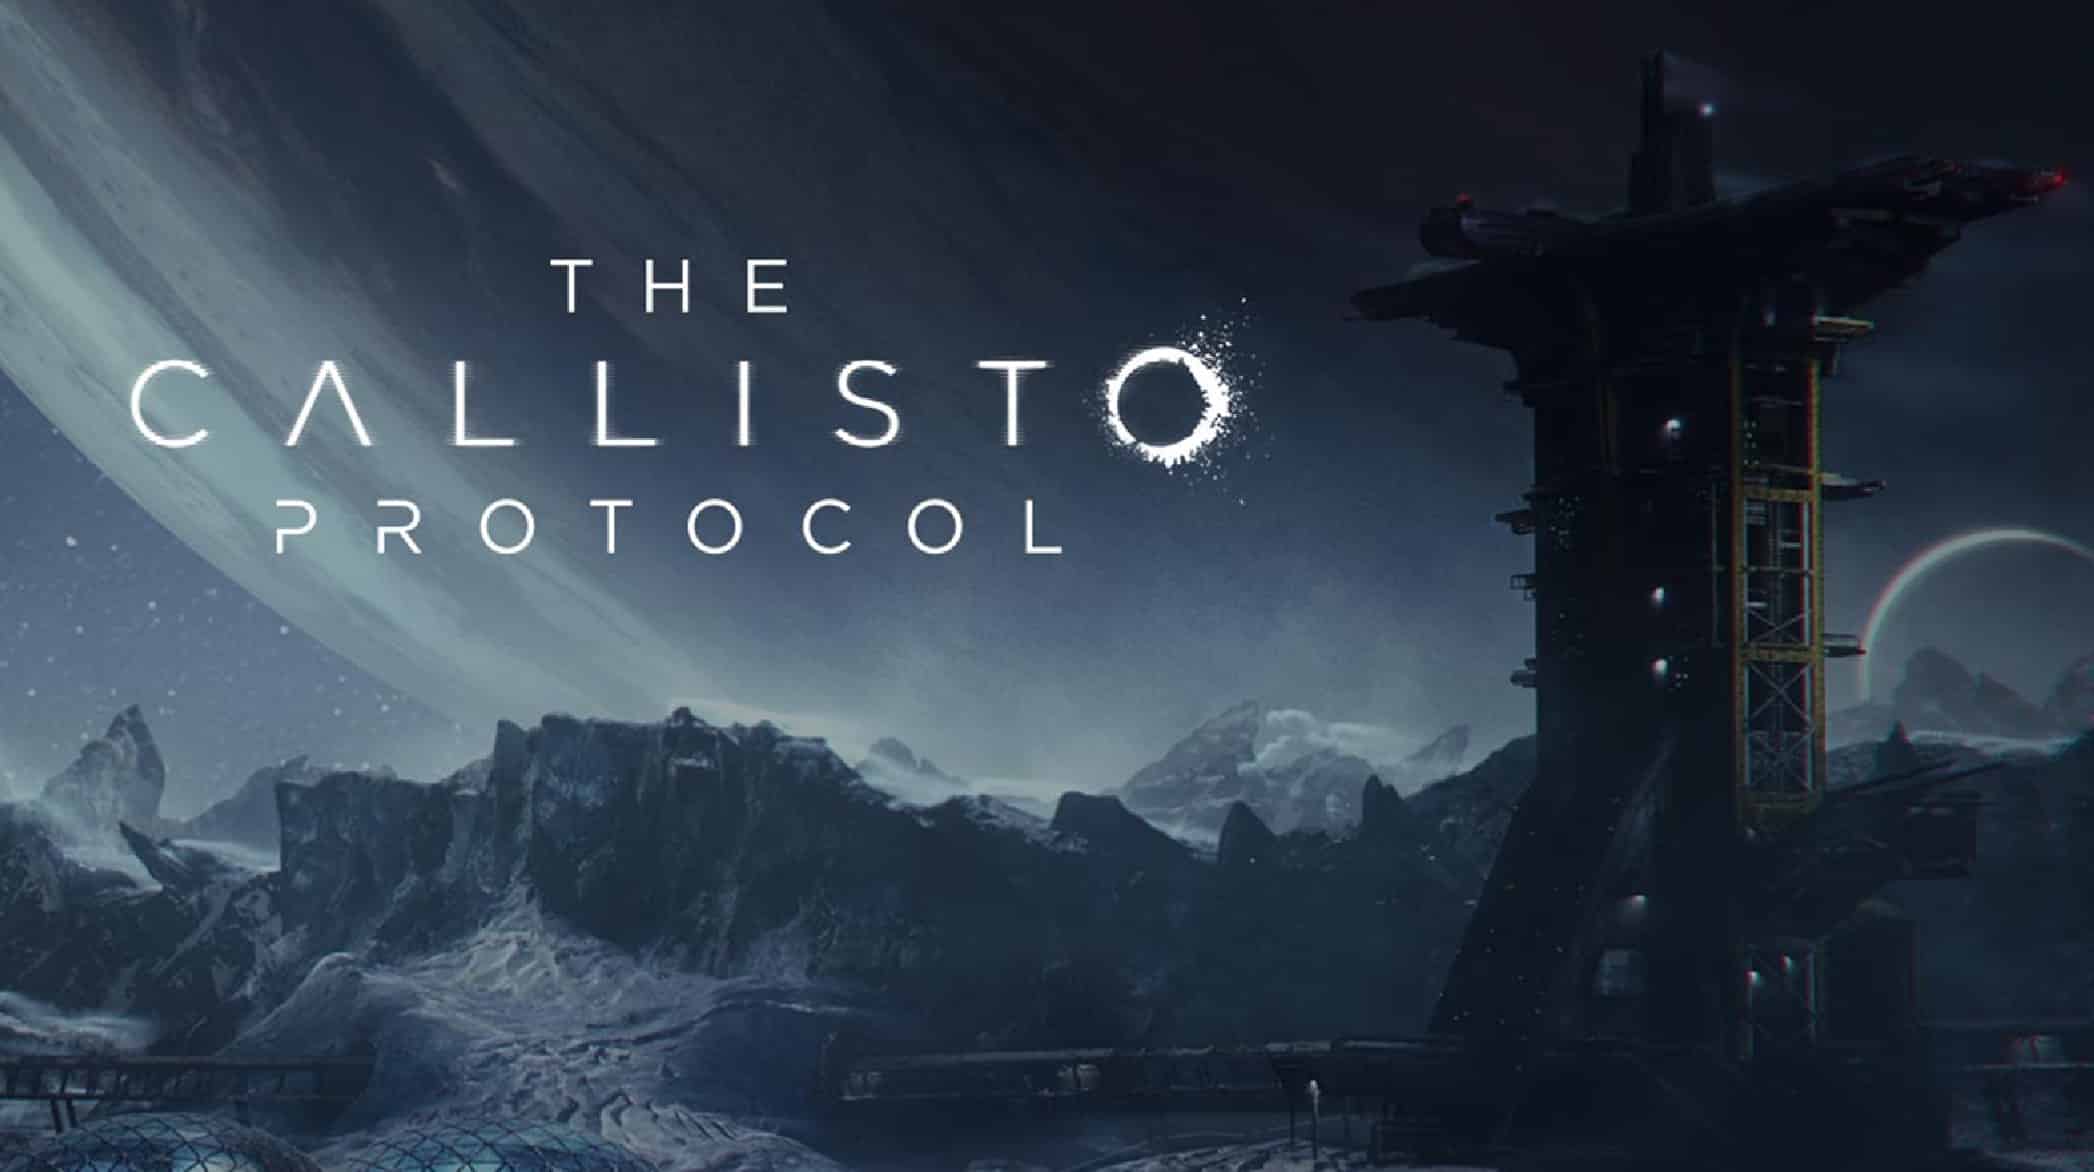 Game Length Play Time: How Long to Beat The Callisto Protocol